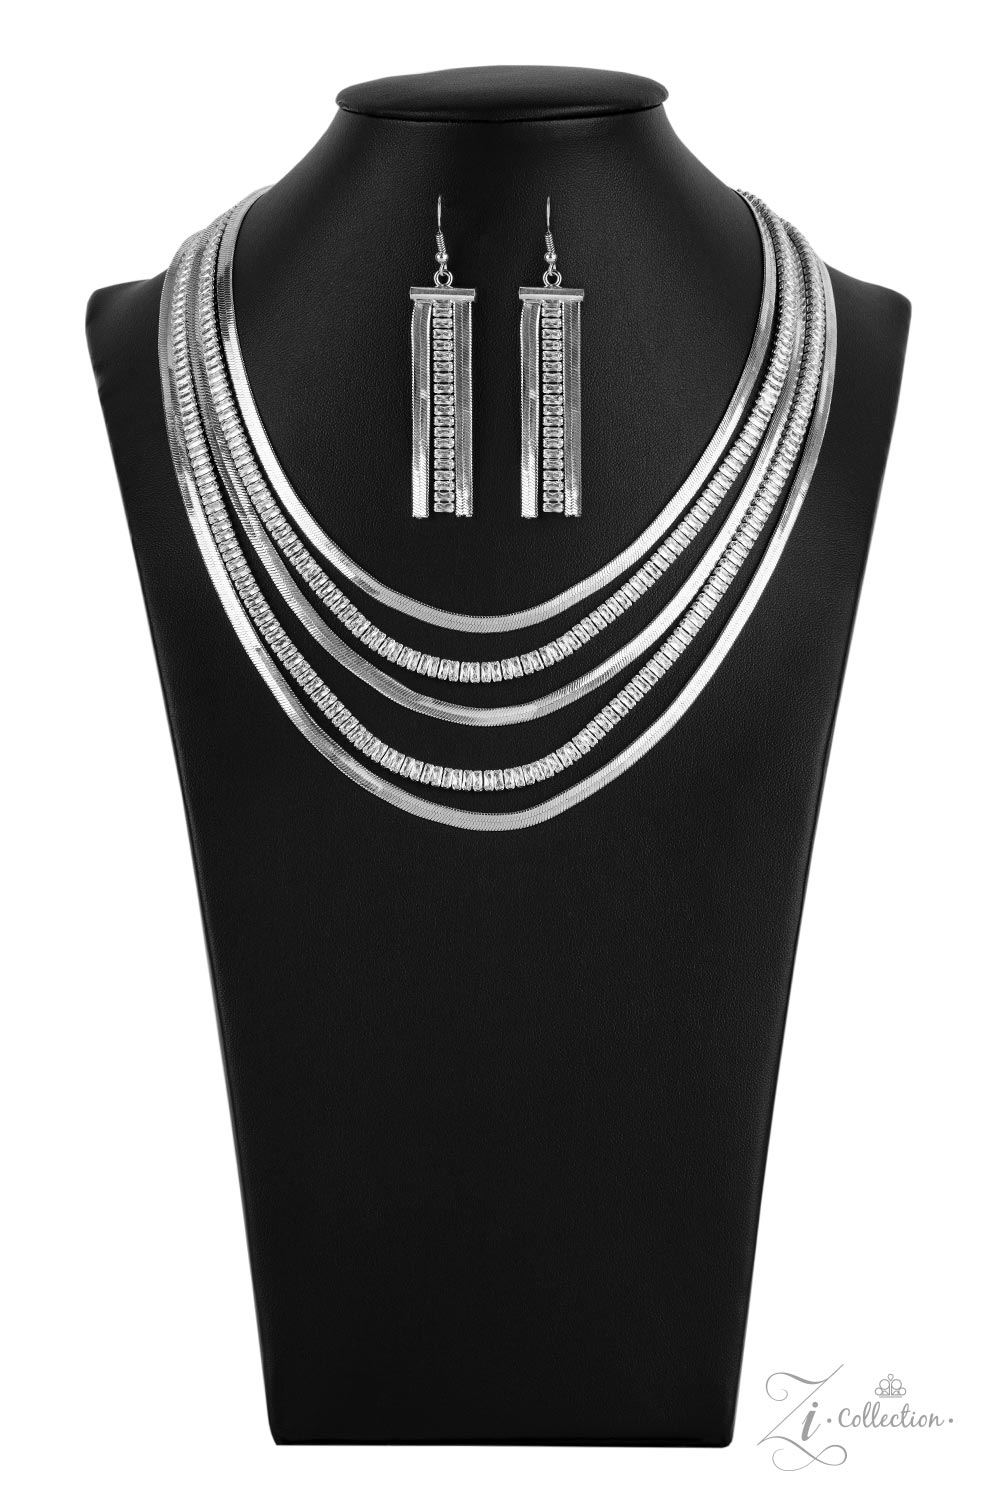 2021 ZI- Collection Persuasive Necklace